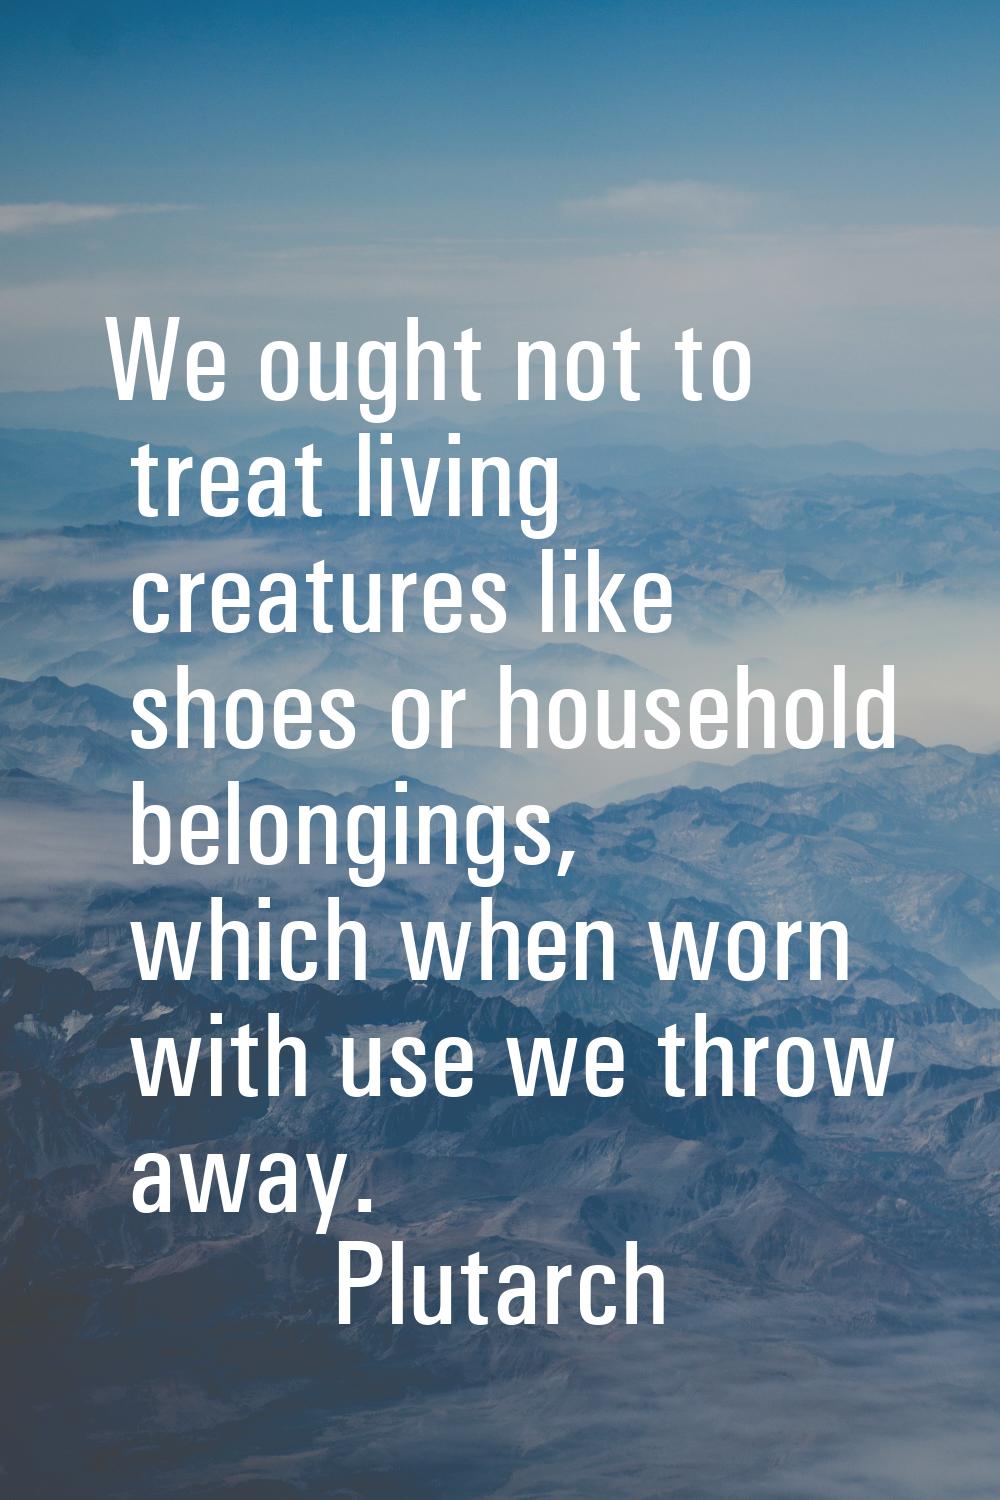 We ought not to treat living creatures like shoes or household belongings, which when worn with use